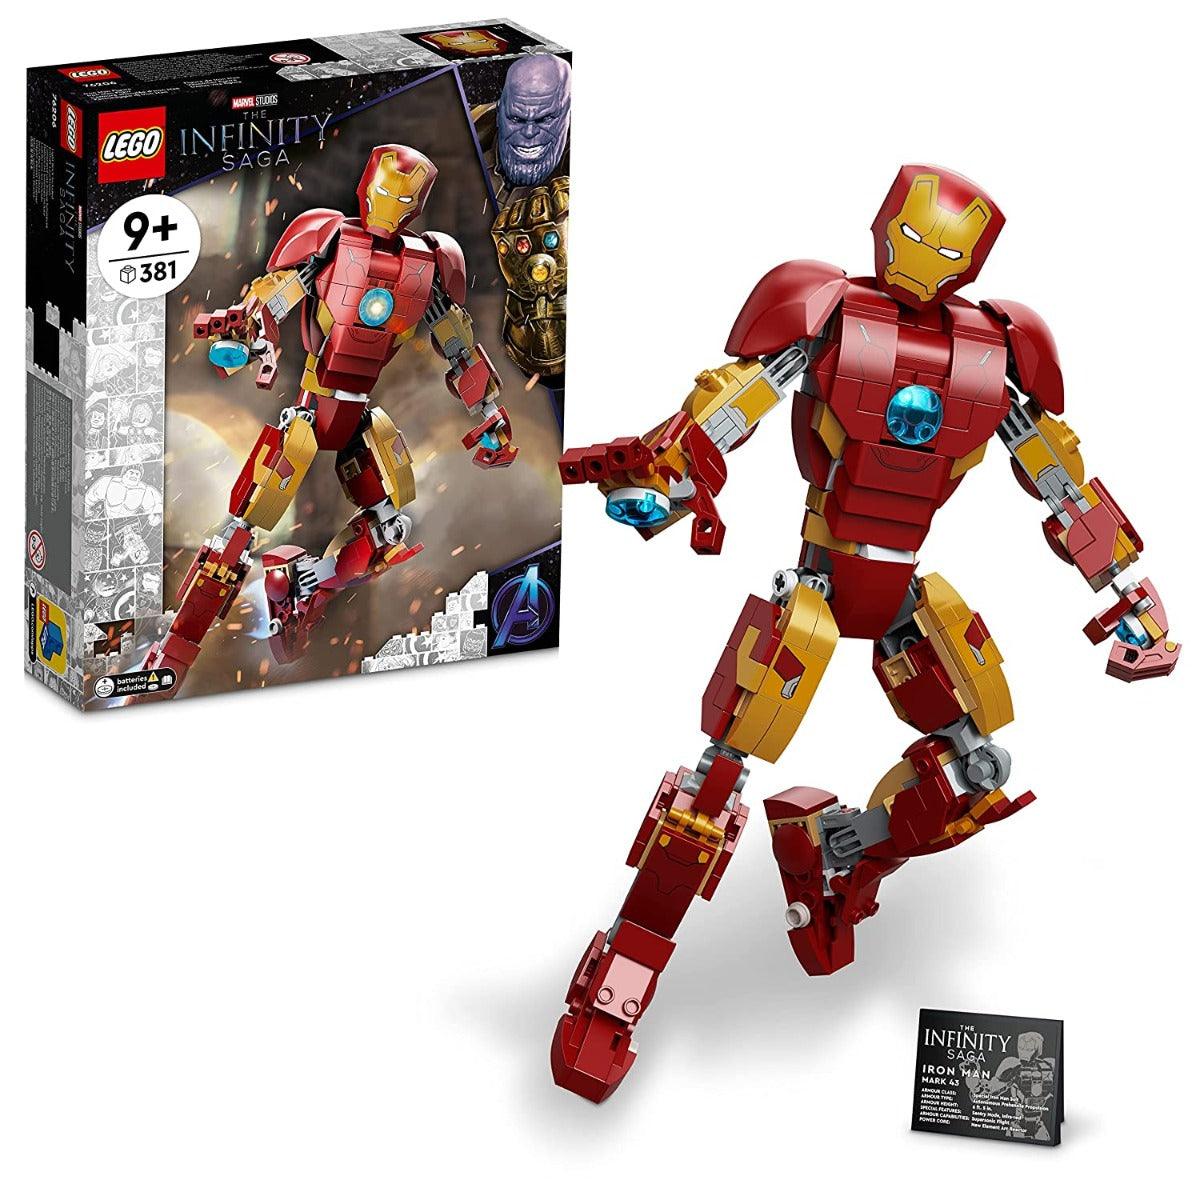 LEGO The Infinity Saga Iron Man Figure Building Kit for Ages 9+